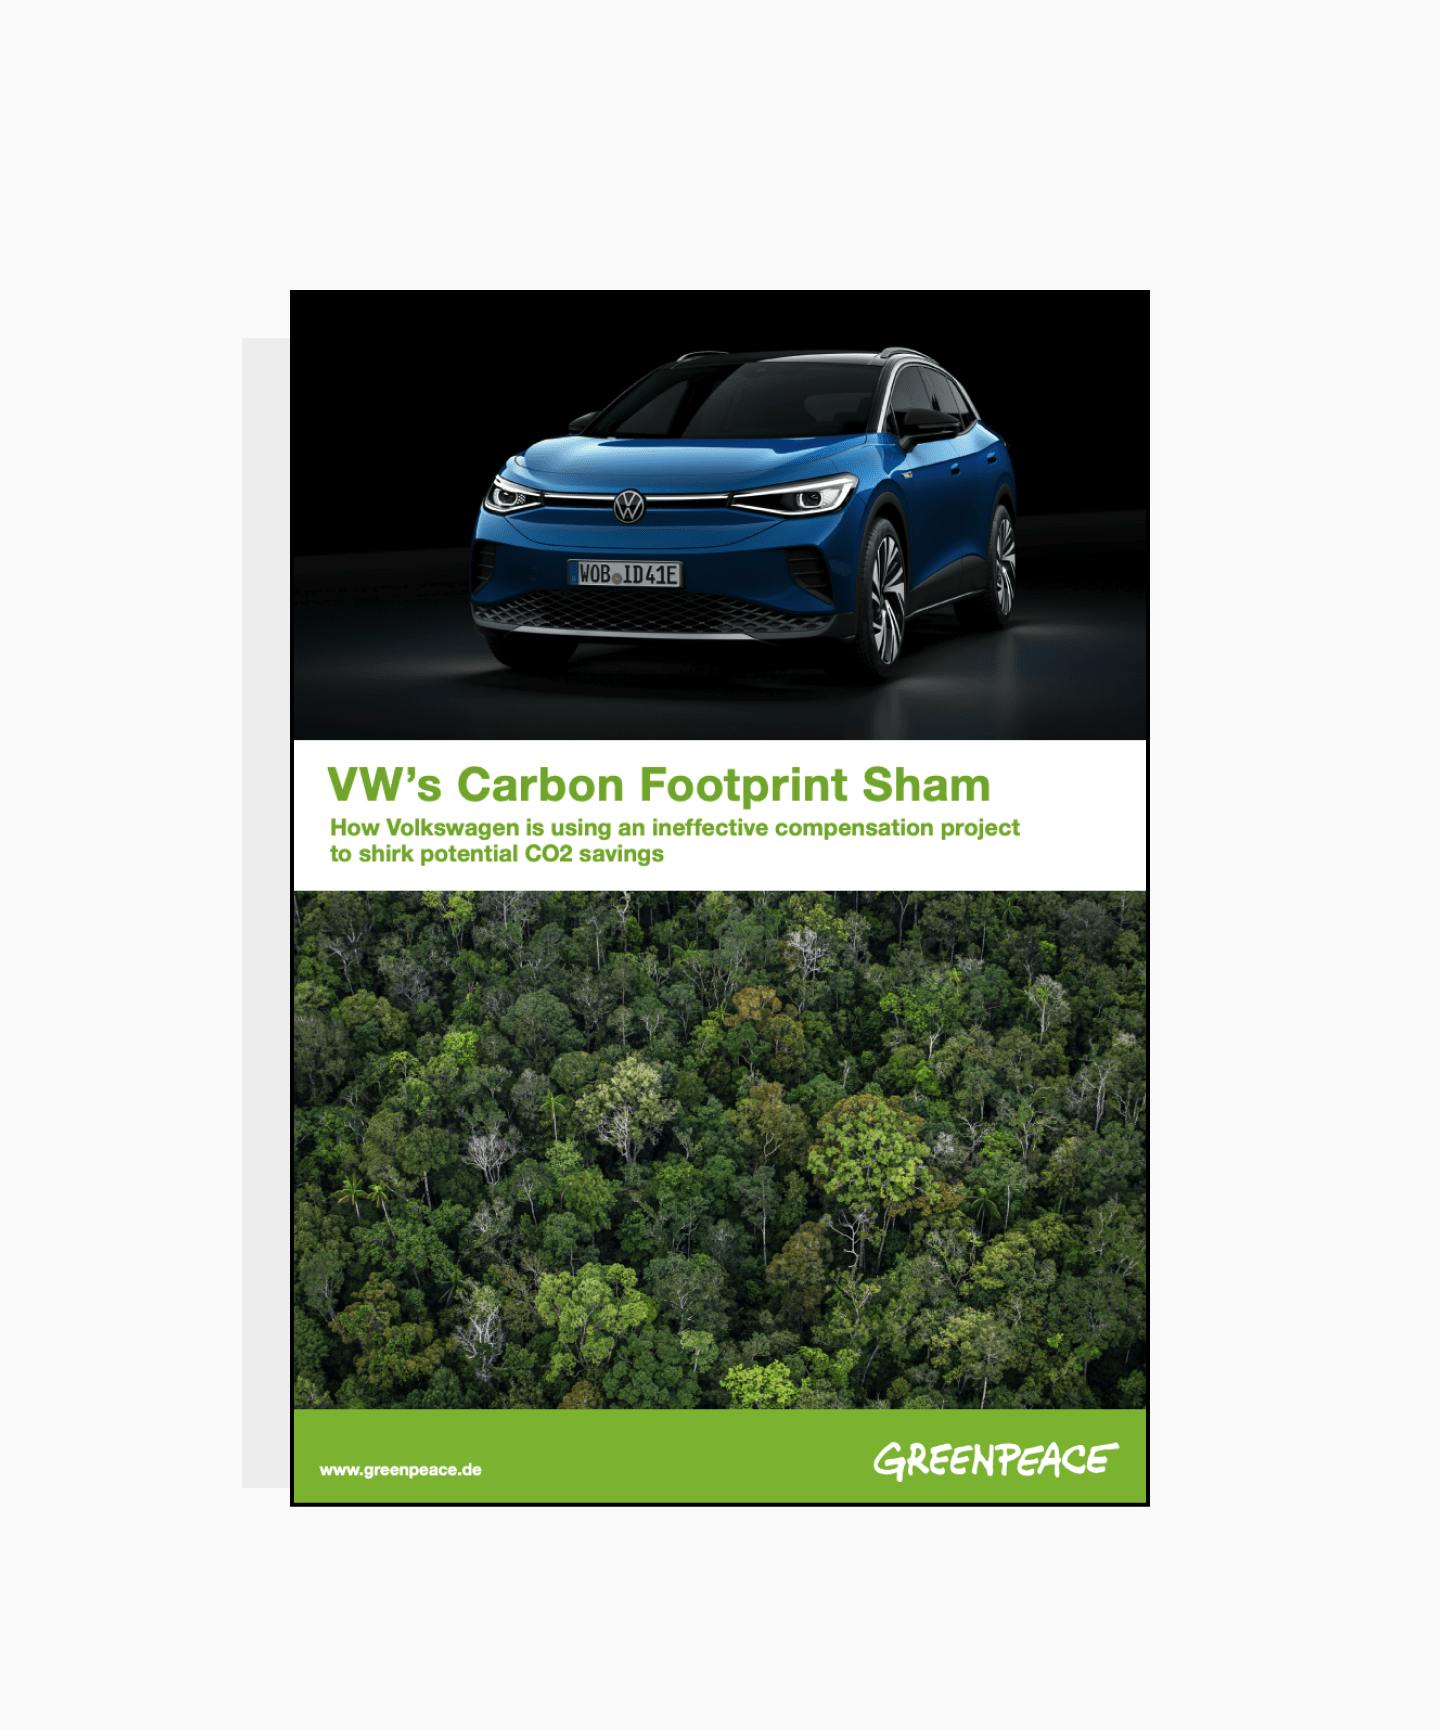 VW's carbon footprint sham – the front cover of the Greenpeace report into Volkswagen's carbon offsetting